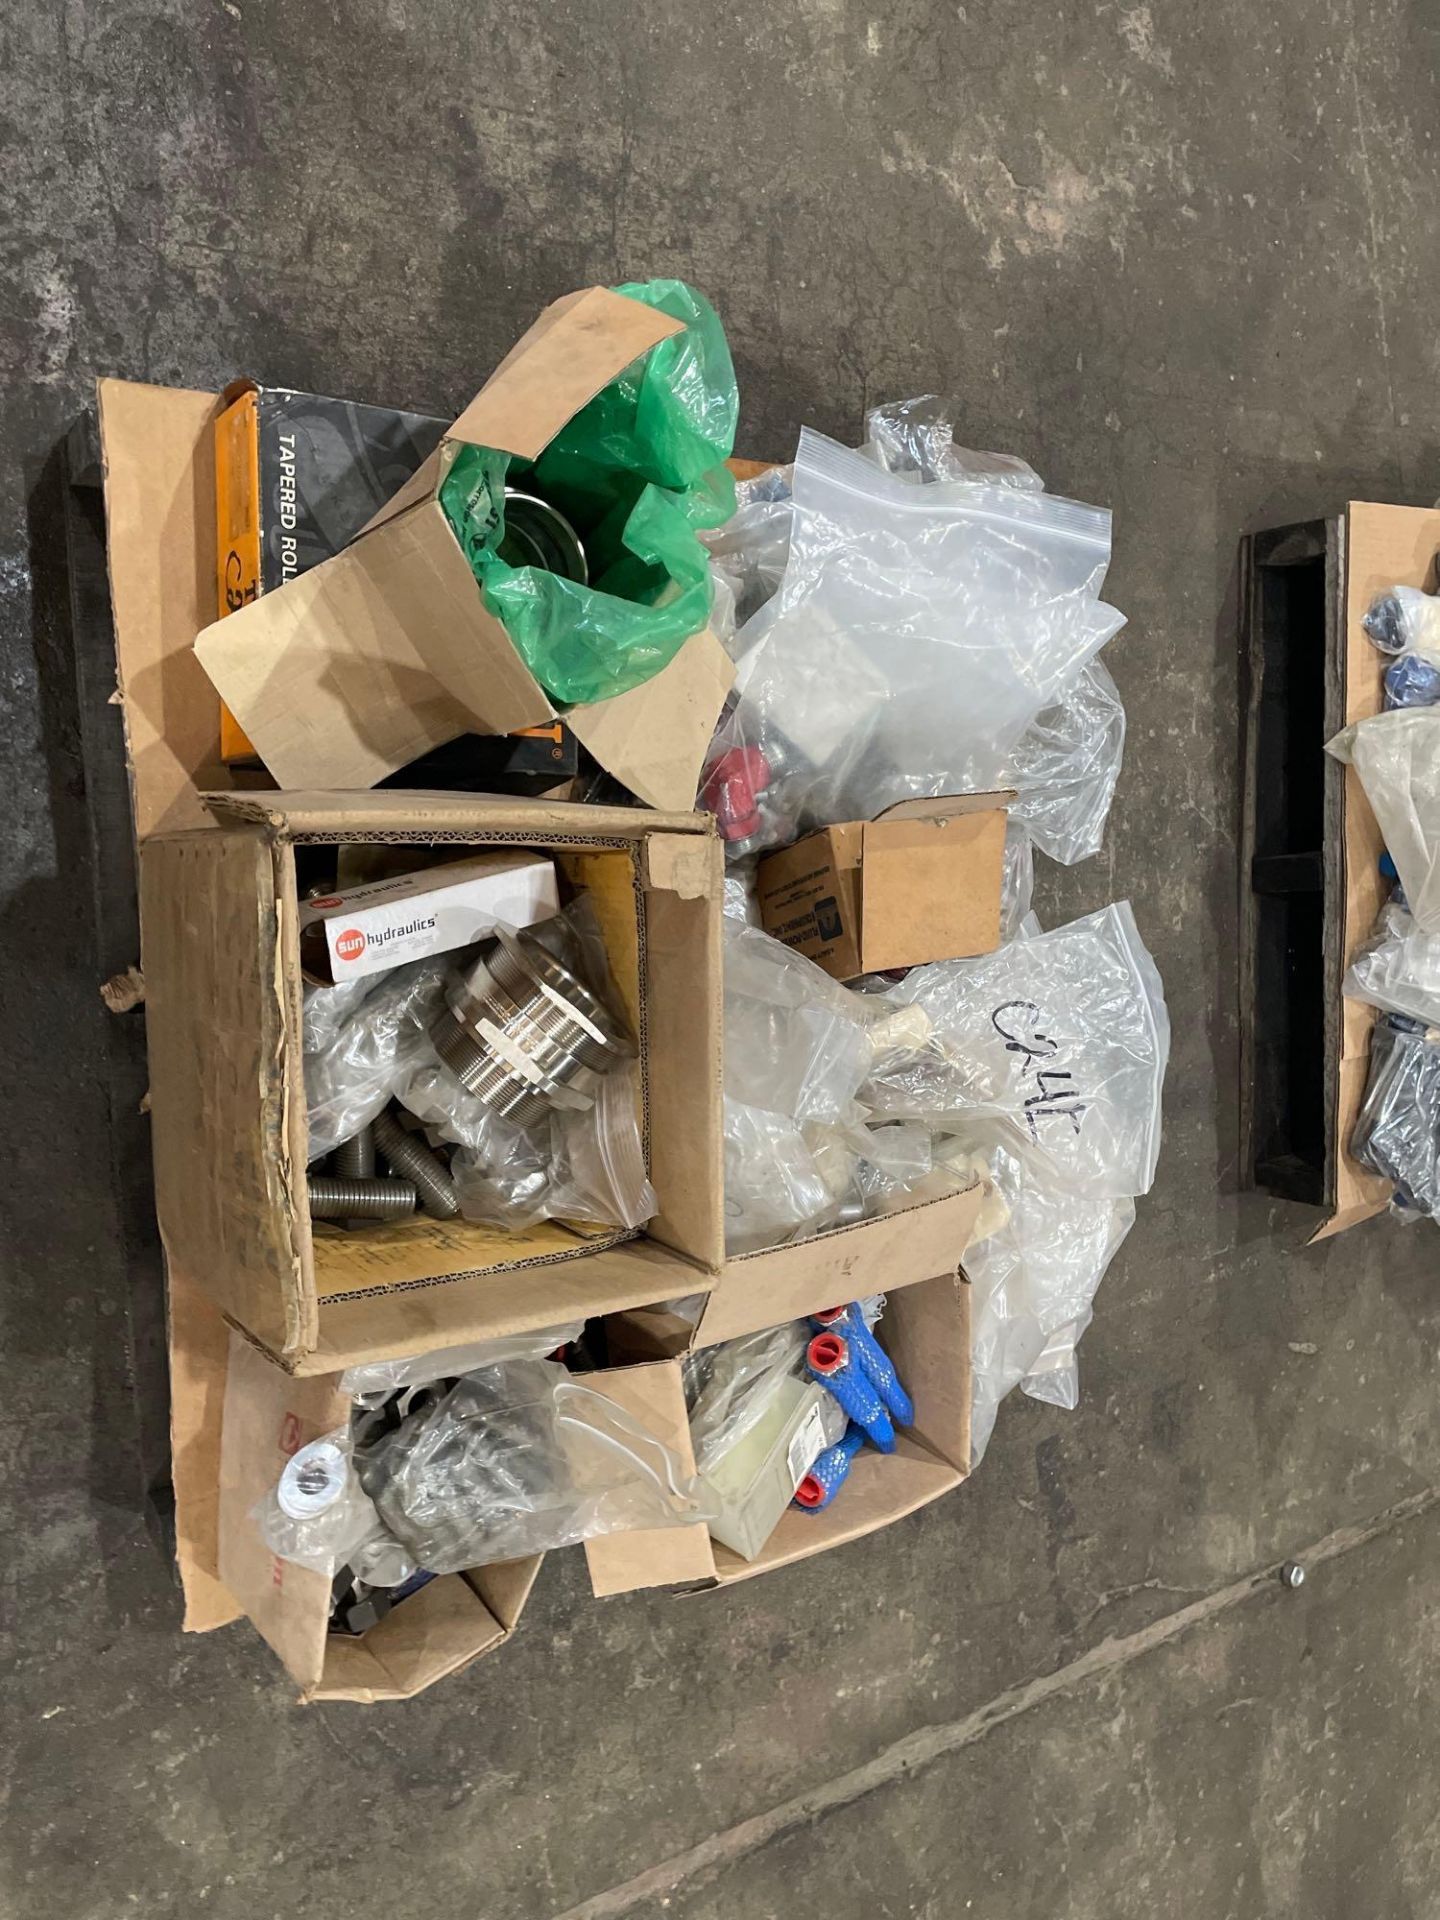 Lot: Assorted Nuts, Bolts and Washers - See Photo